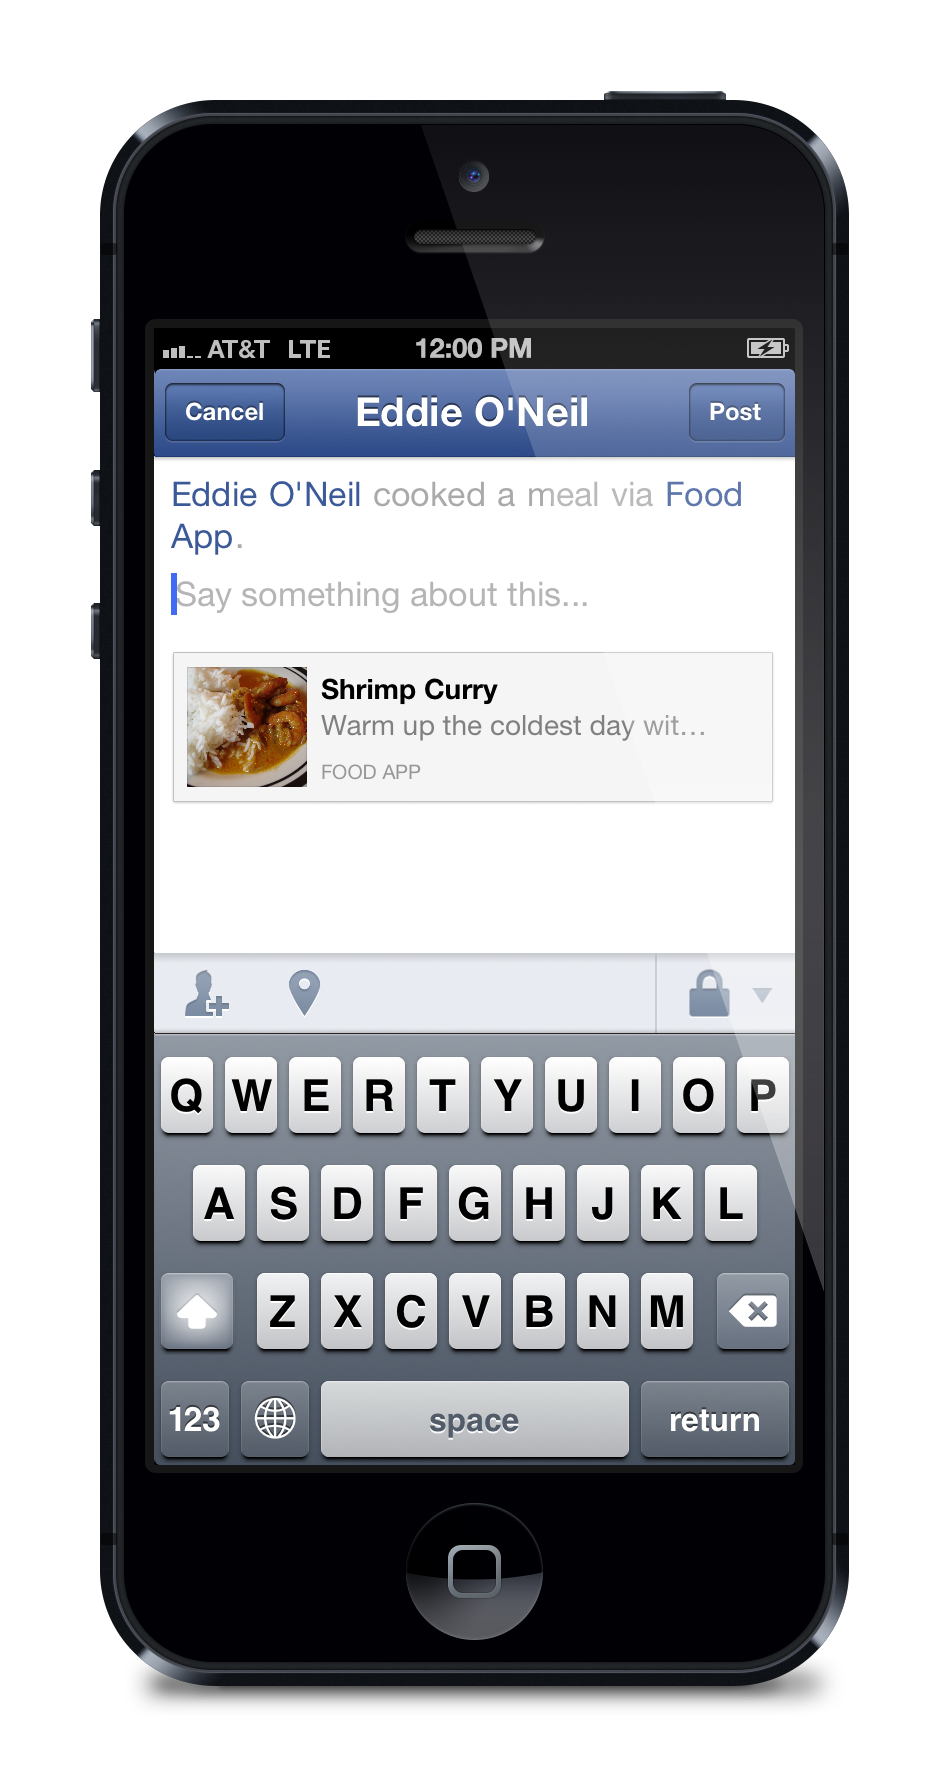 Facebook Mobile Adds New SDK for iOS, Launches Open Graph ...